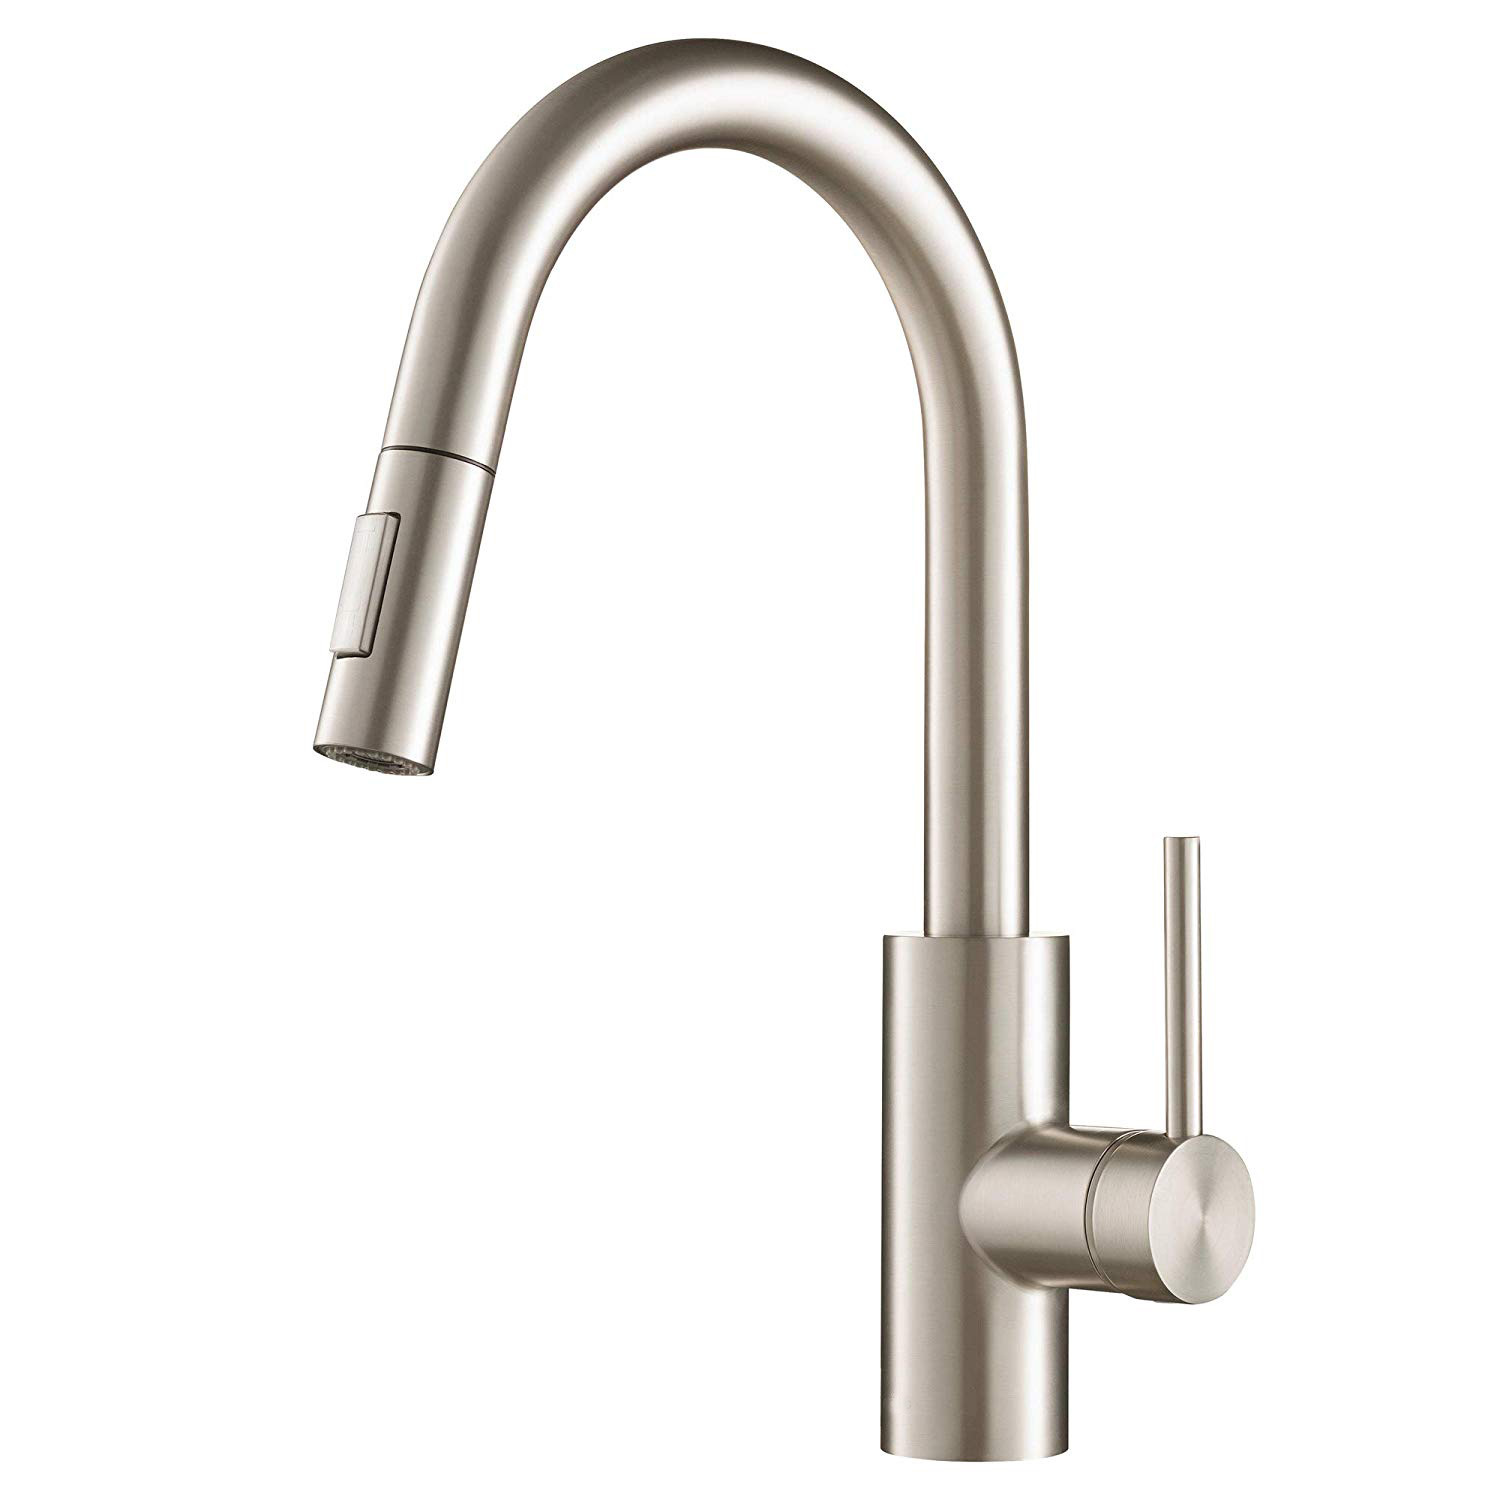 Modern Single Lever Pull Down Kitchen Faucet Spot Free Stainless Steel Awsso Faucet